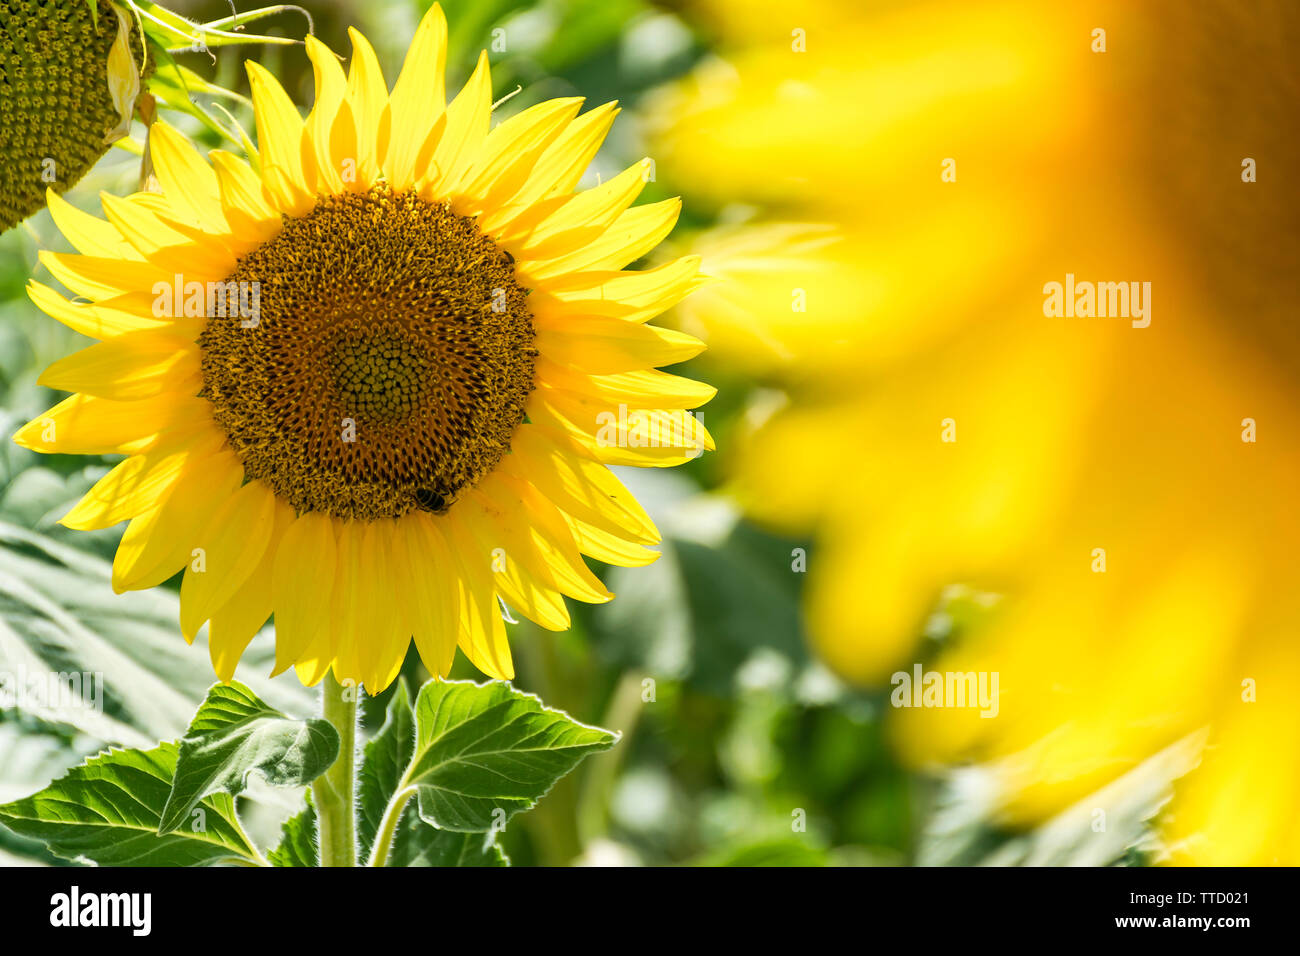 Sunflowers from the fields of Andalucia,Spain. Stock Photo